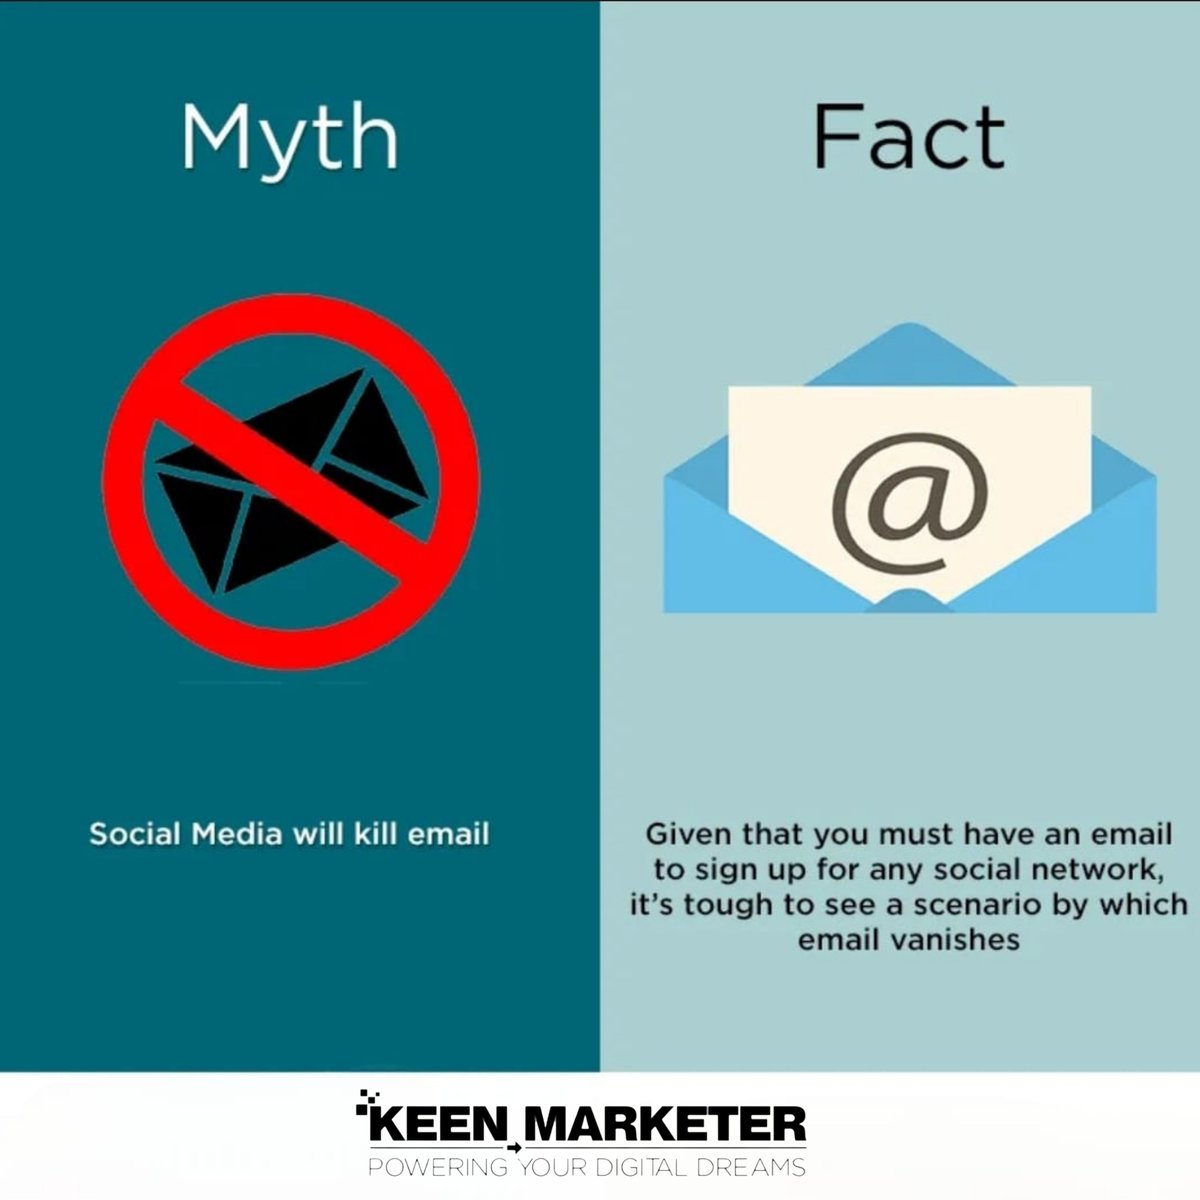 Diving into the myths and facts about social media! Separate truth from fiction and master your online presence. 📱💡 𝗖𝗼𝗻𝘁𝗮𝗰𝘁 𝘂𝘀 𝗳𝗼𝗿 𝘆𝗼𝘂𝗿 𝗽𝗿𝗼𝗷𝗲𝗰𝘁 𝗾𝘂𝗲𝗿𝘆. 🔗Visit Our Website: keenmarketer.in 📞 Call Now: +91-931-934-7701 #keenmarketer